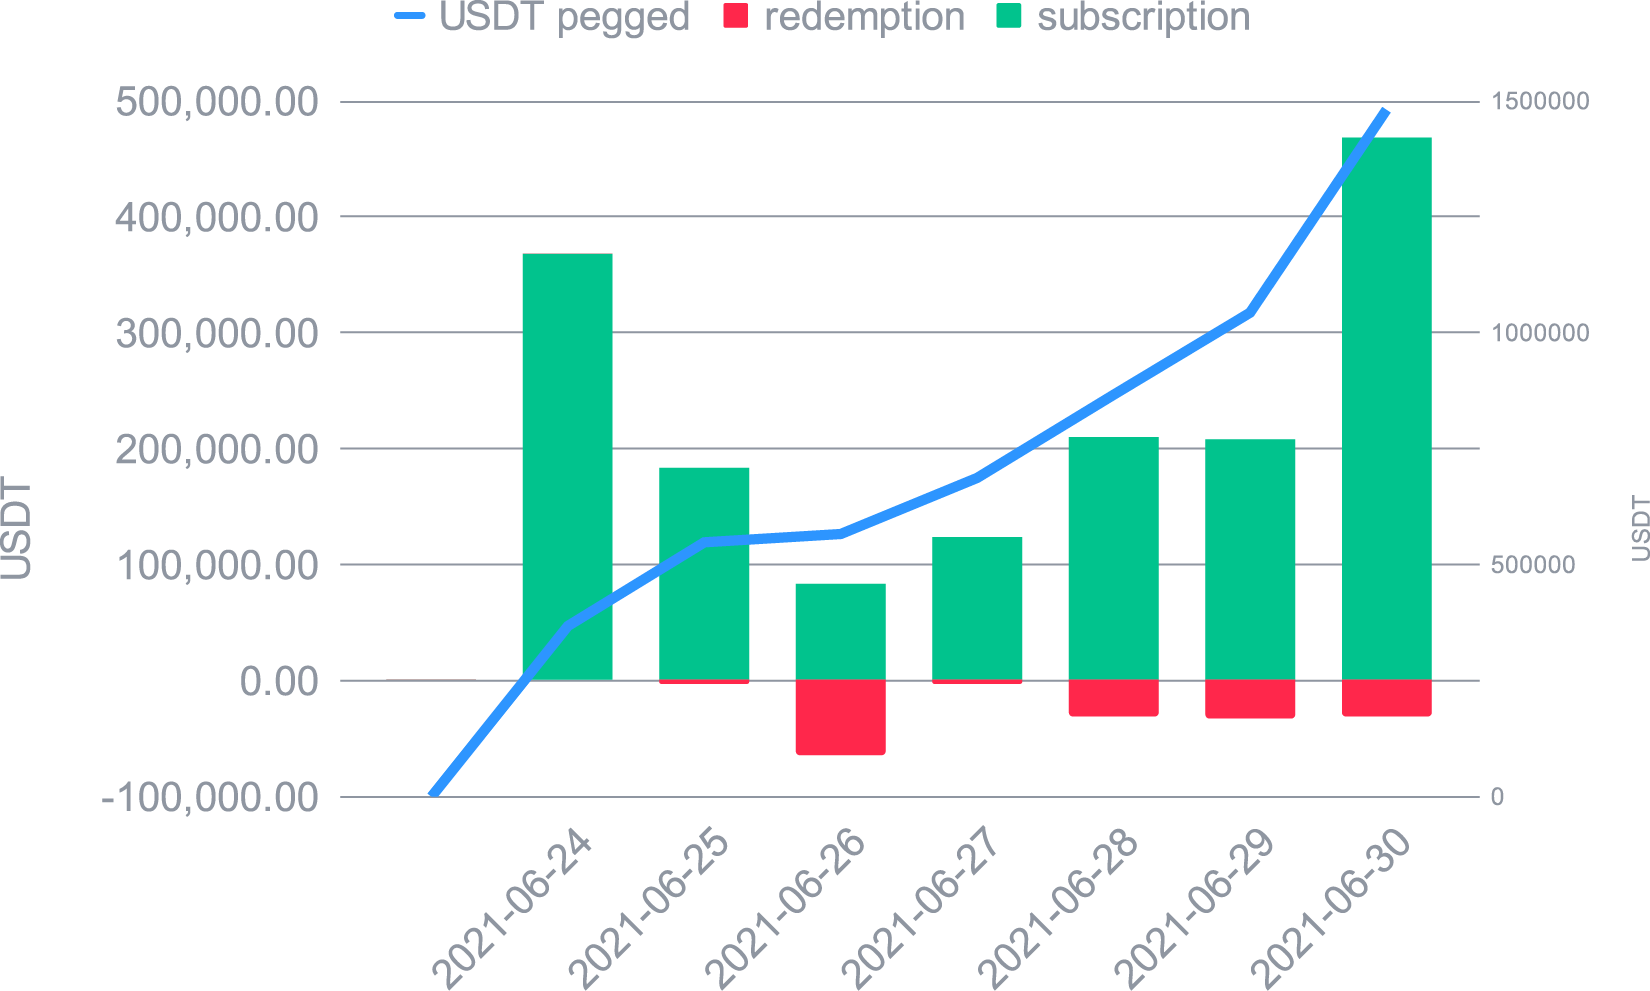 USDT growth in the Smart Yield wallet and daily subscriptions/redemptions